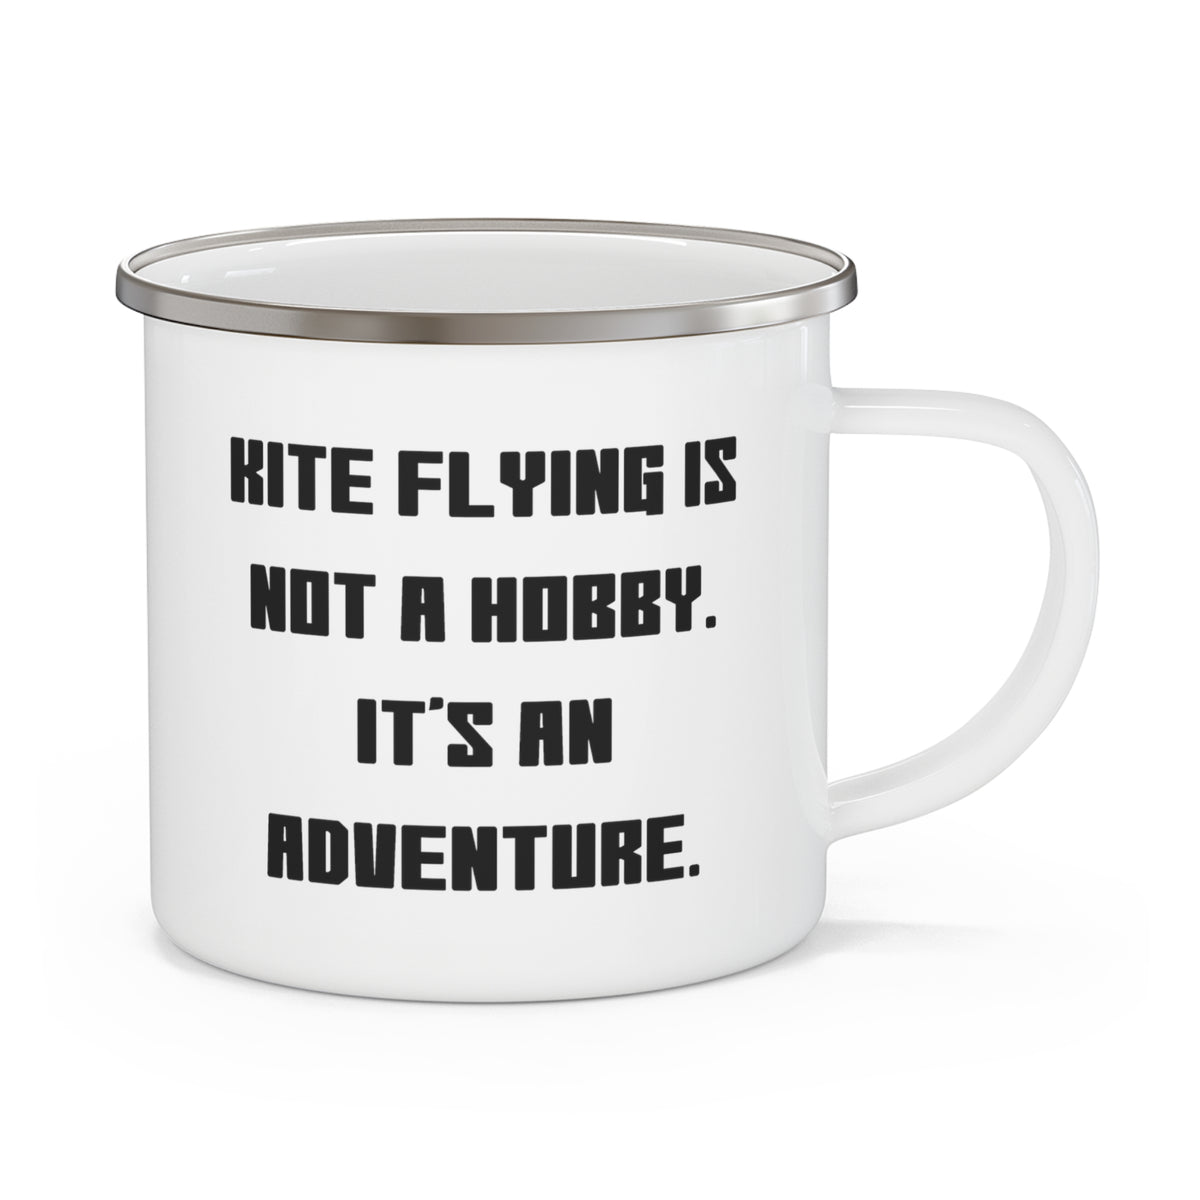 Epic Kite Flying Gifts, Kite Flying is not a Hobby. It's an Adventure, Birthday 12oz Camper Mug For Kite Flying, Kite flying kit, Kite flying lessons